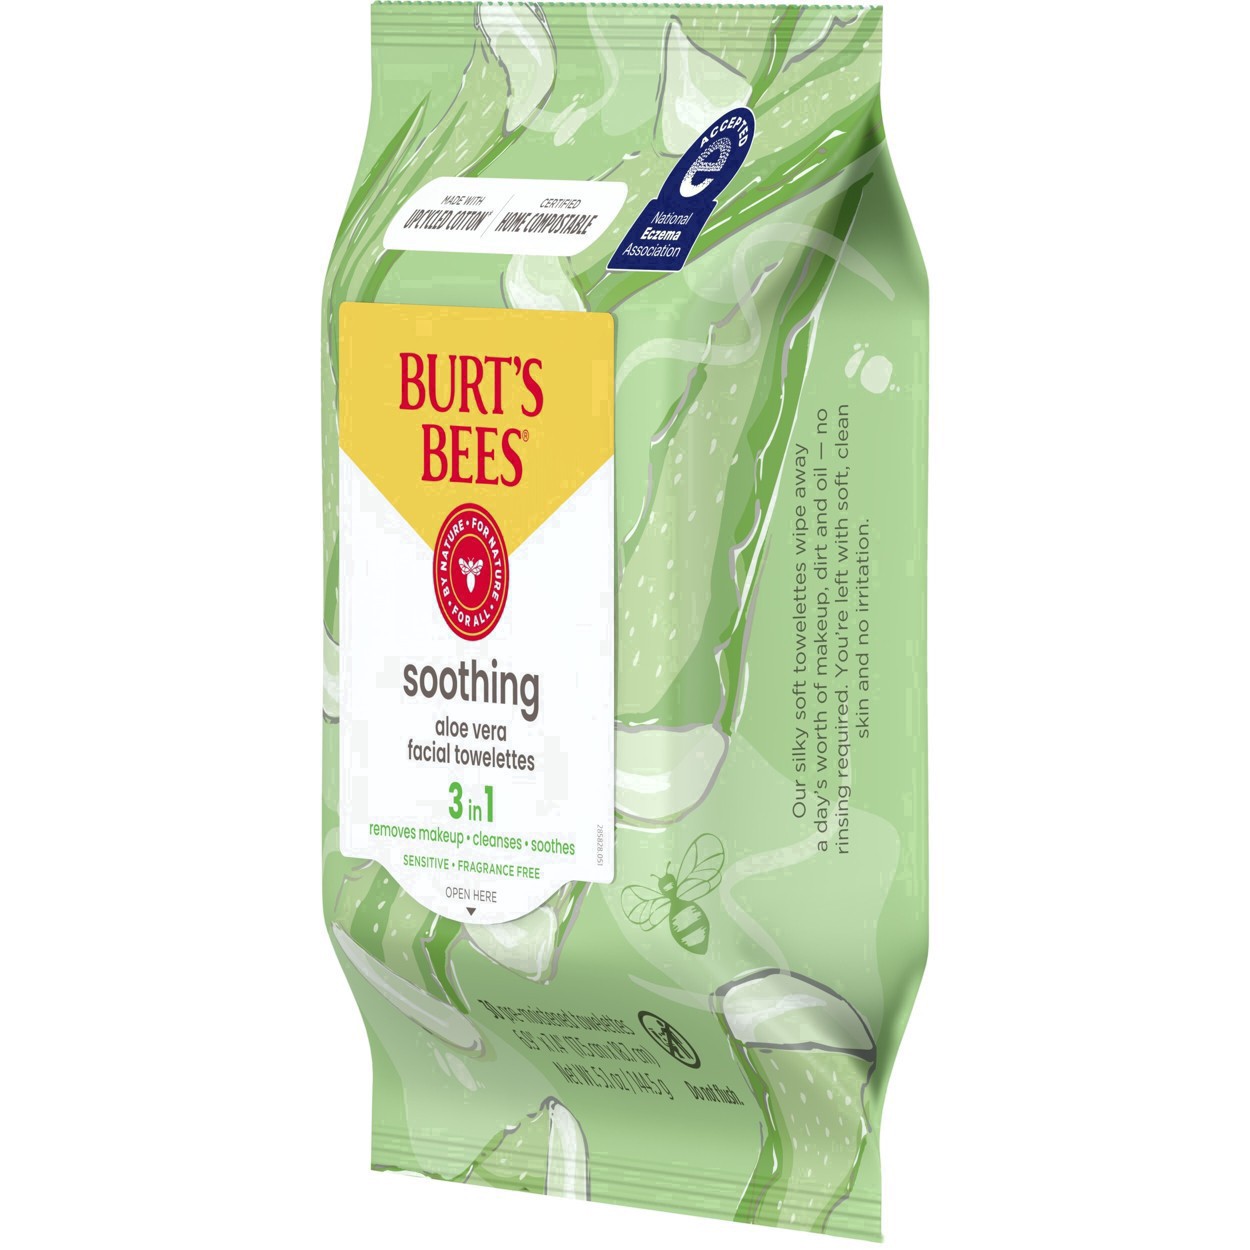 slide 103 of 137, Burt's Bees Soothing Facial Cleanser and Makeup Remover Towelettes with Aloe Vera for Sensitive Skin, Made with Upcycled Cotton, 30 Count, 30 ct